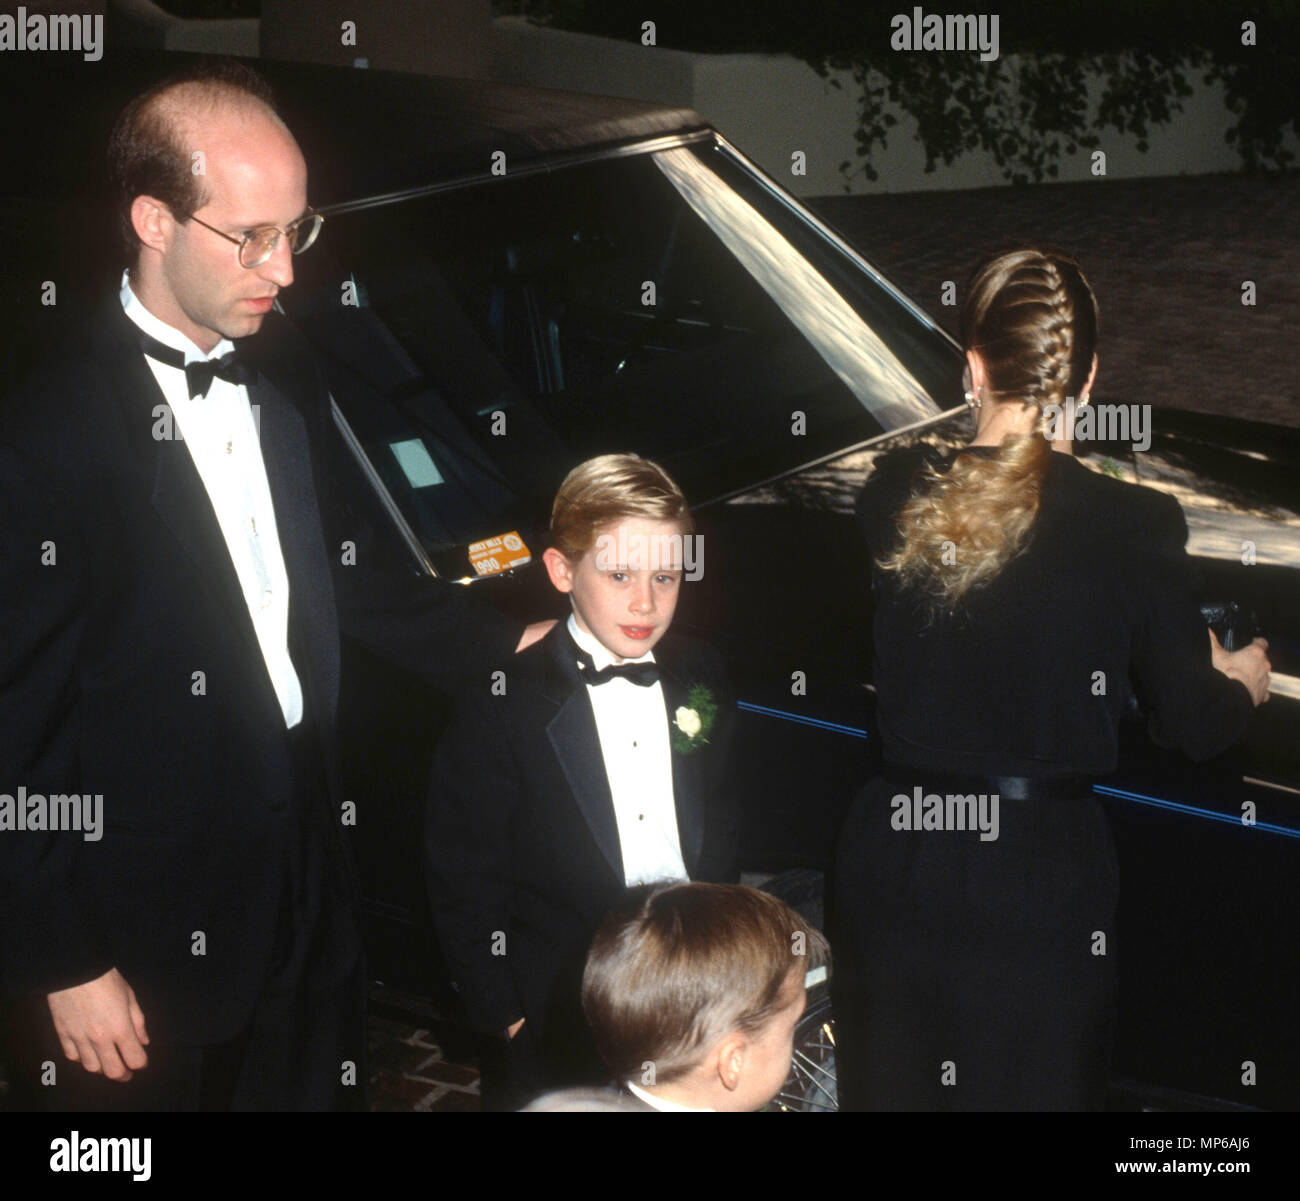 BEVERLY HILLS, CA - JANUARY 19: Actor Macaulay Culkin and family attend the 48th Annual Golden Globe Awards on January 19, 1991 at the Beverly Hilton Hotel in Beverly Hills, California. Photo by Barry King/Alamy Stock Photo Stock Photo